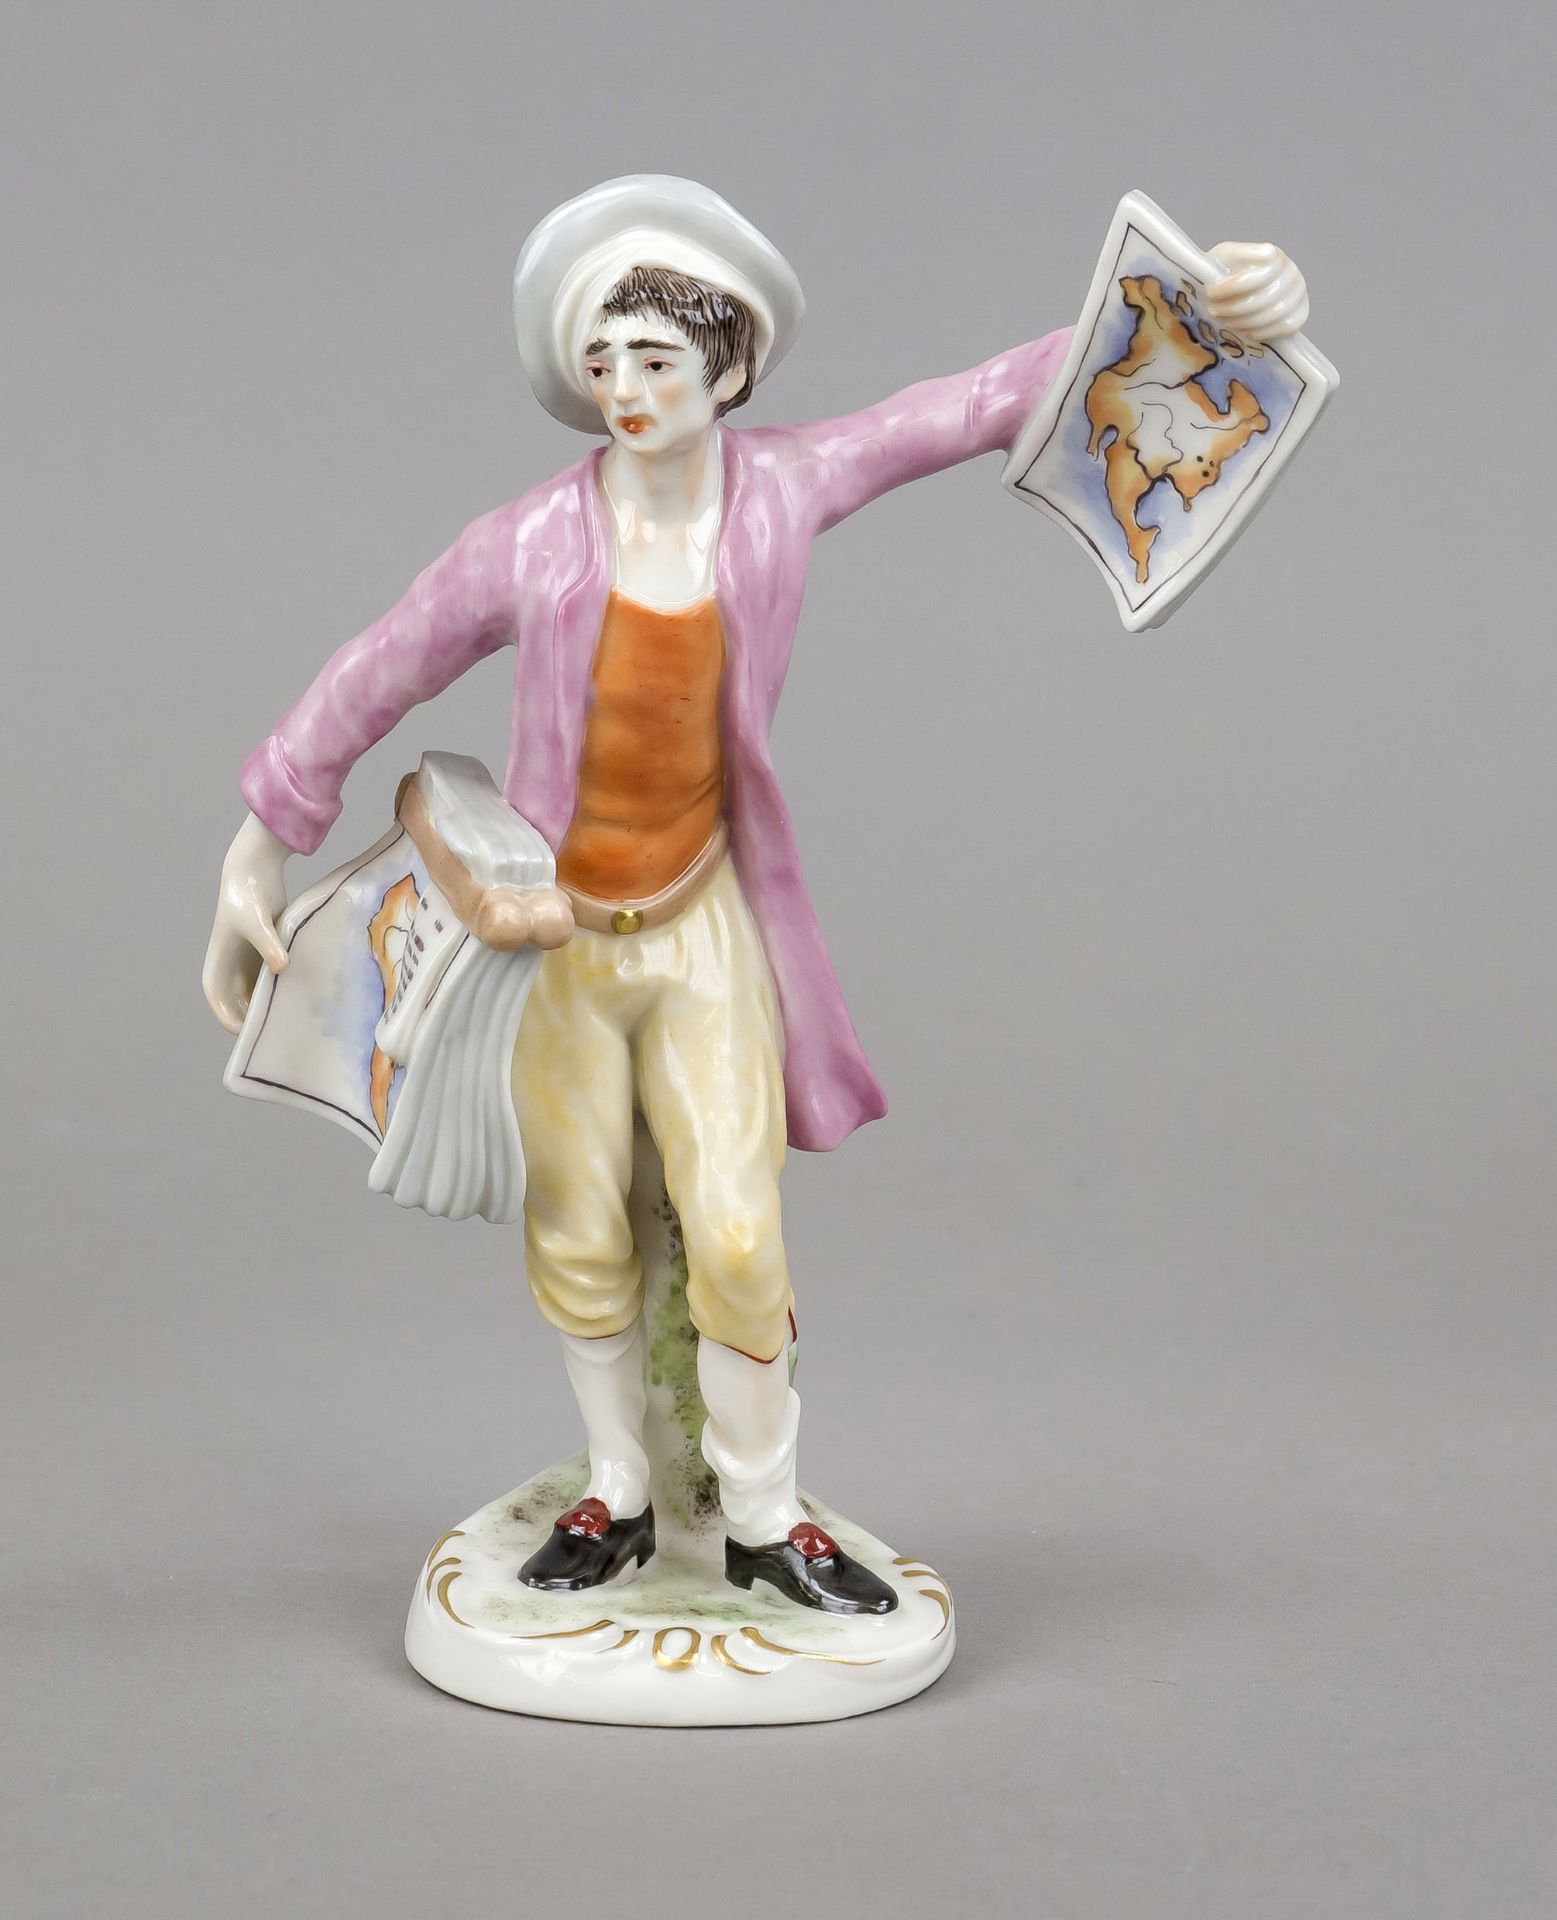 Map seller, Ludwigsburg, mark after 1973, polychrome painted, ornamentally gilded, h. 16.5 cm